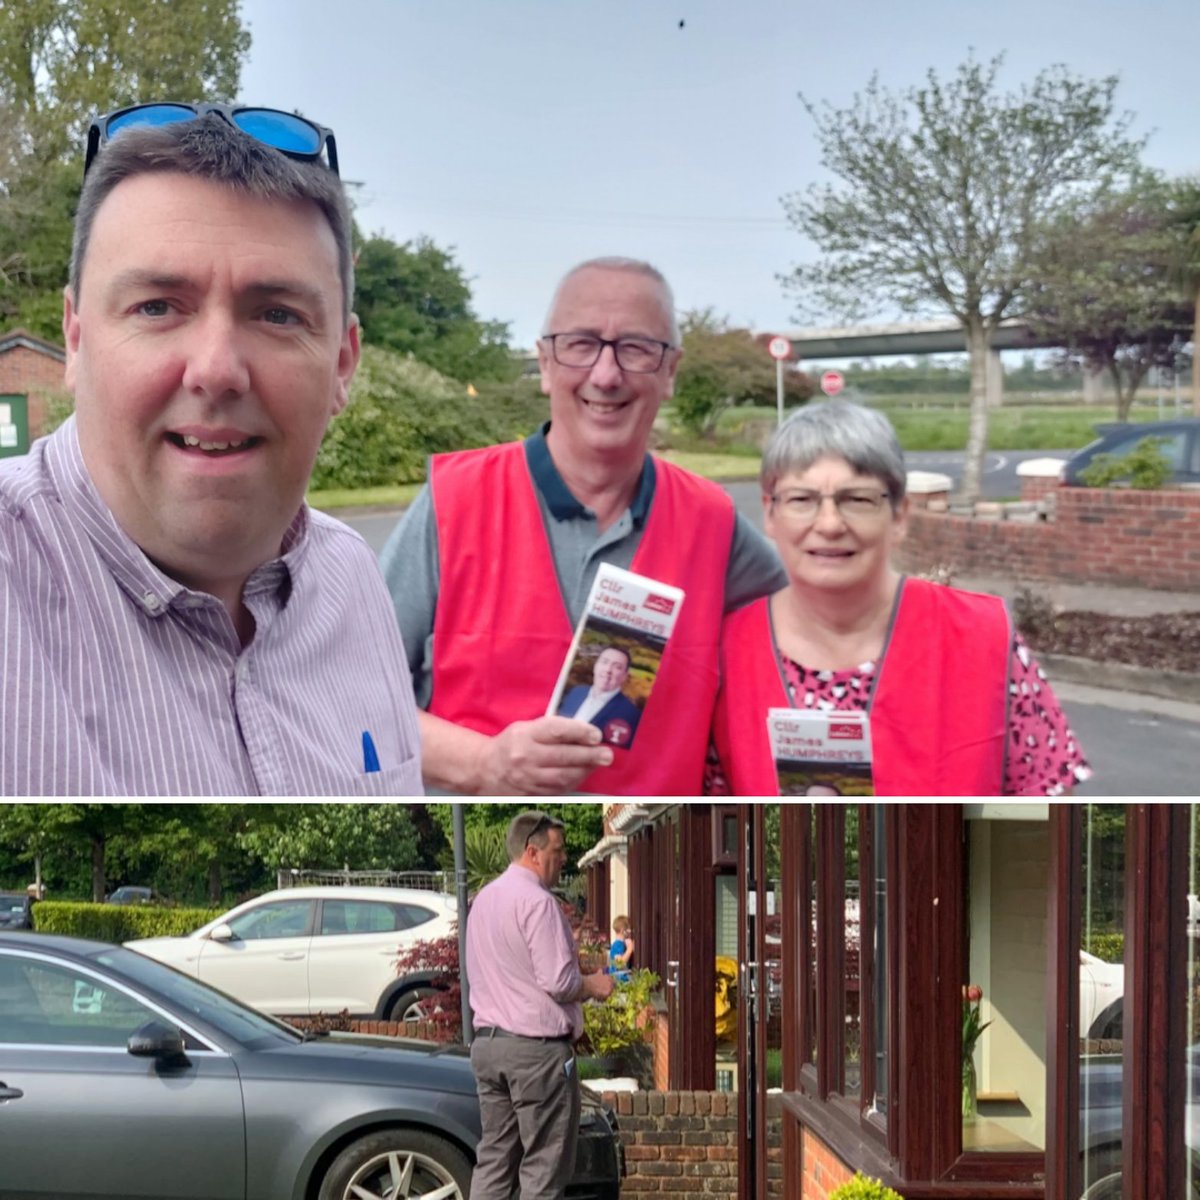 Great afternoon on a @labour canvass in Swords with @KHumphreysDBS enjoying the good weather and chats with residents about playgrounds, metro/public transport, dog fouling, footpaths and more. 🤞This is a sign for the next 5 weeks